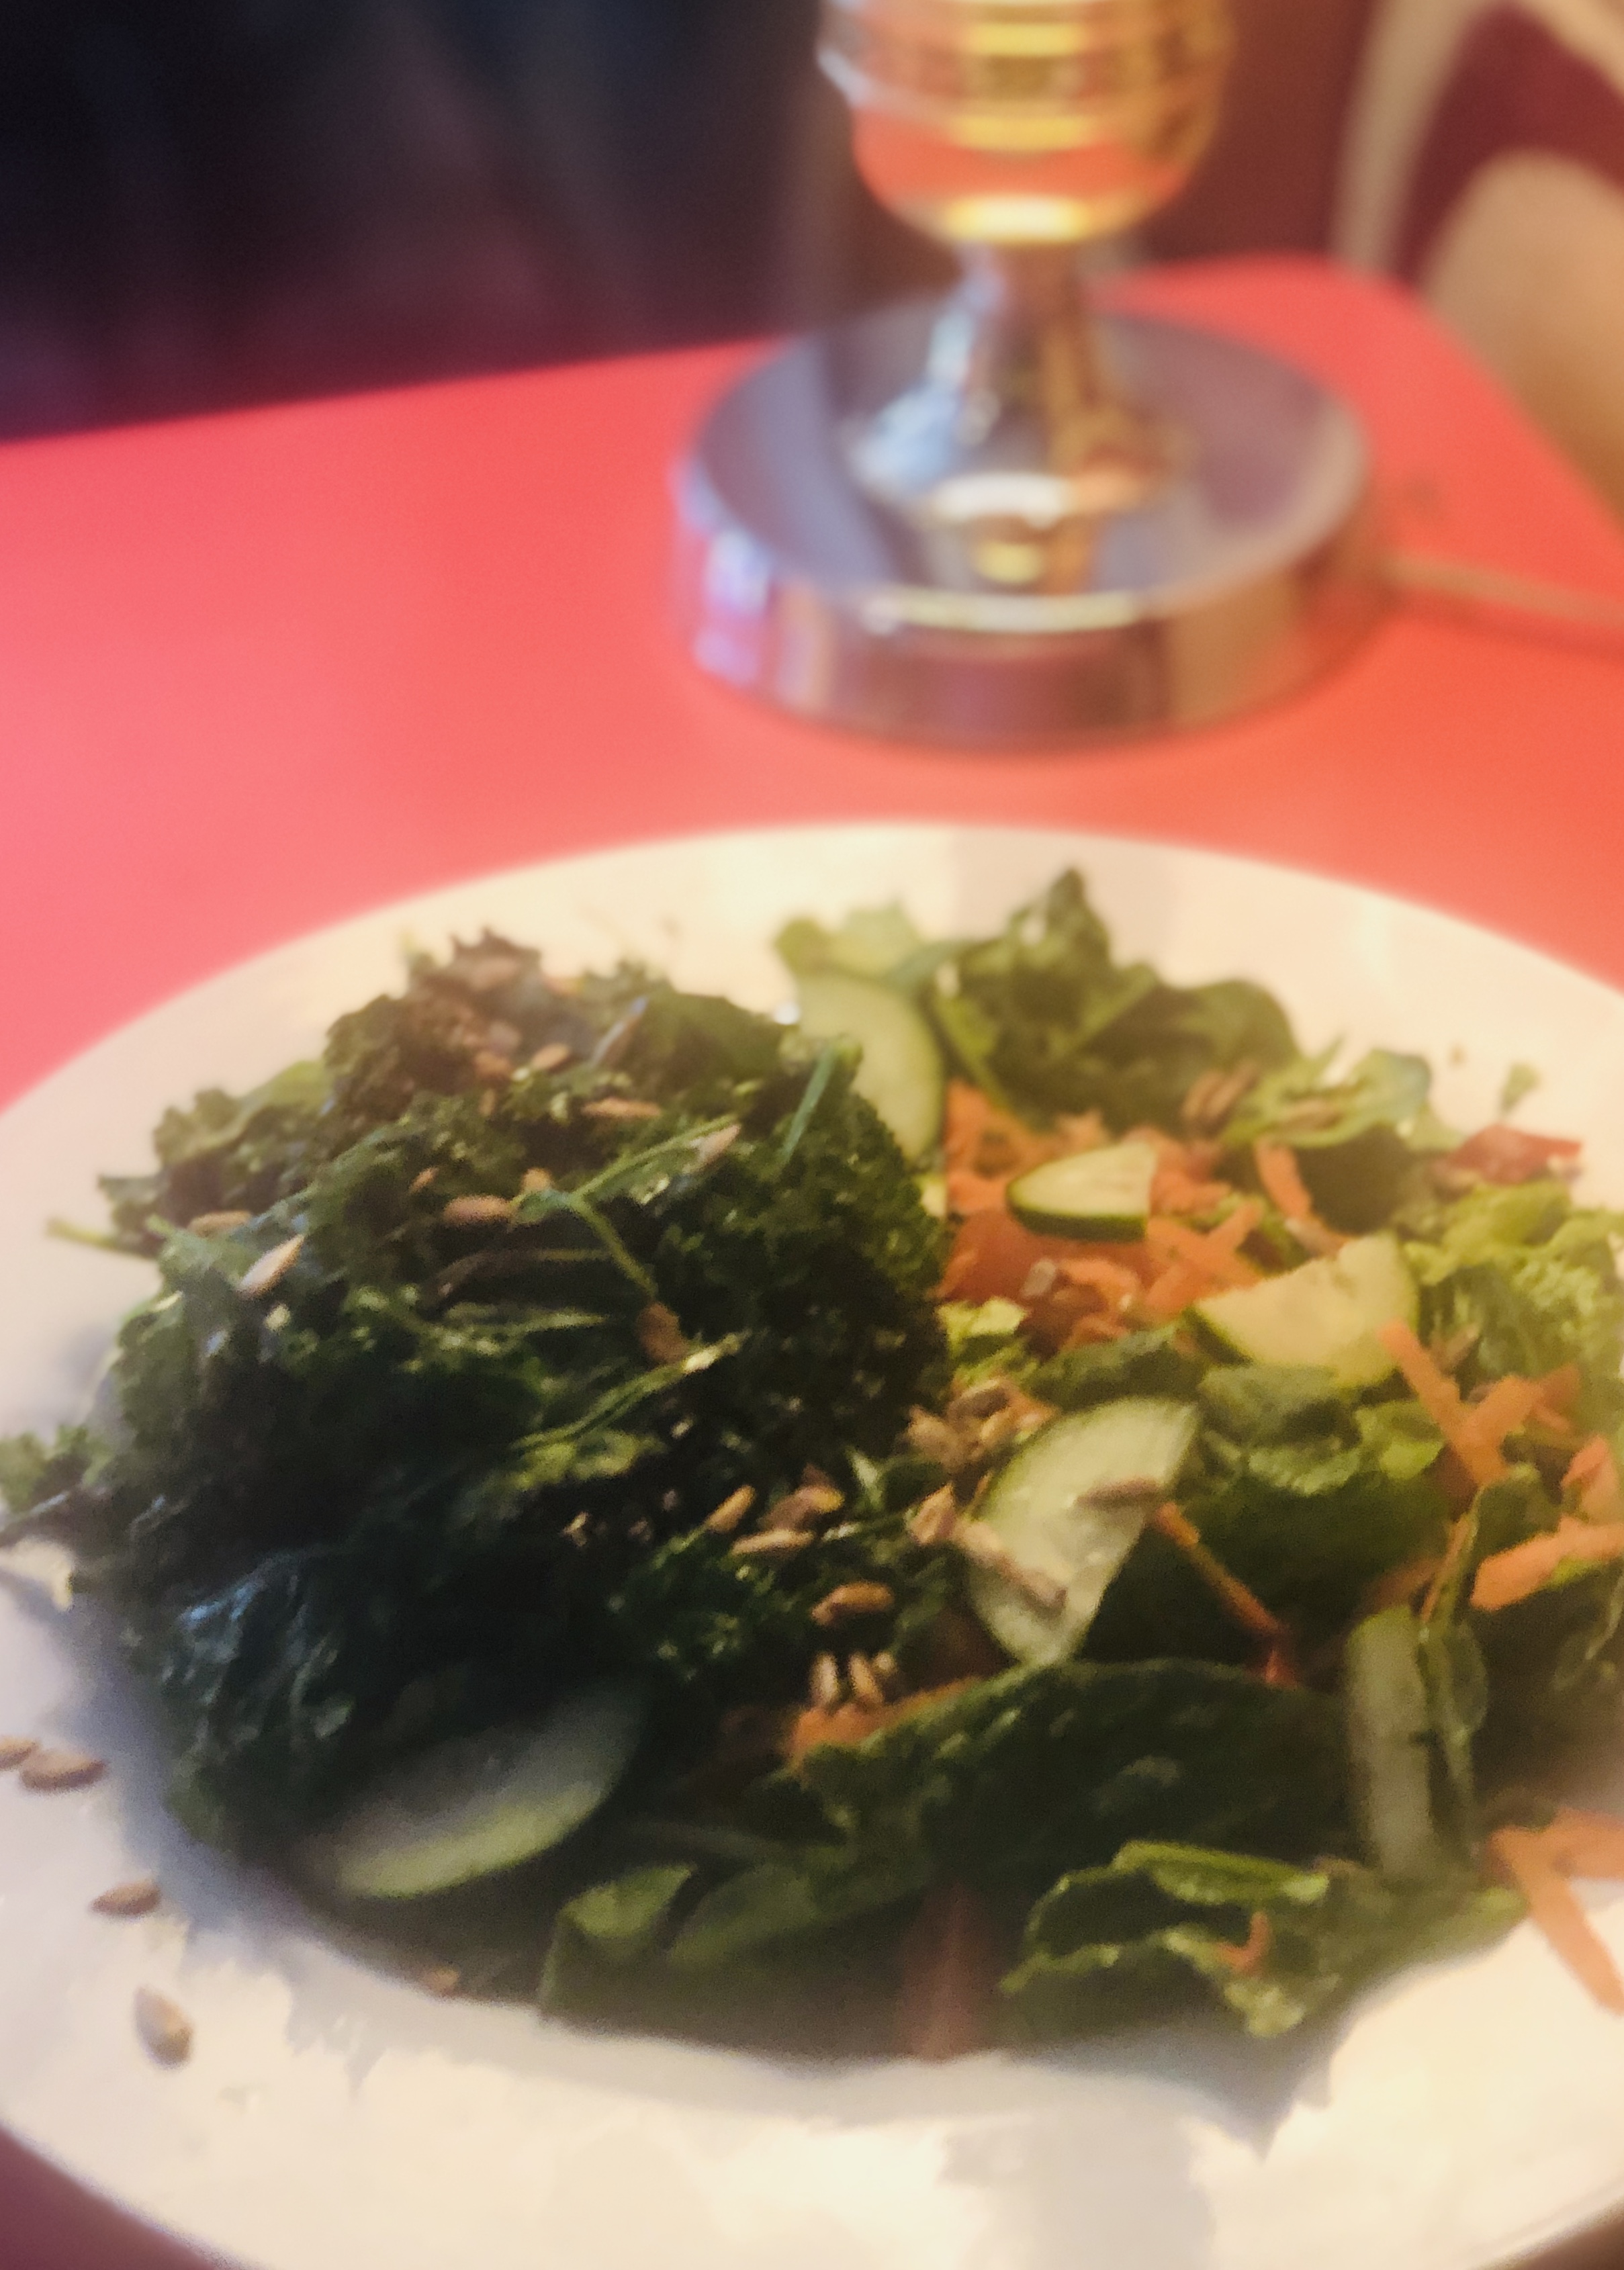 A bed of greens with cucumbers, shaved carrots, seared kale, and sunflower seeds is in a large, white bowl on a red table at Red Herring. Photo by Kate Aldridge.